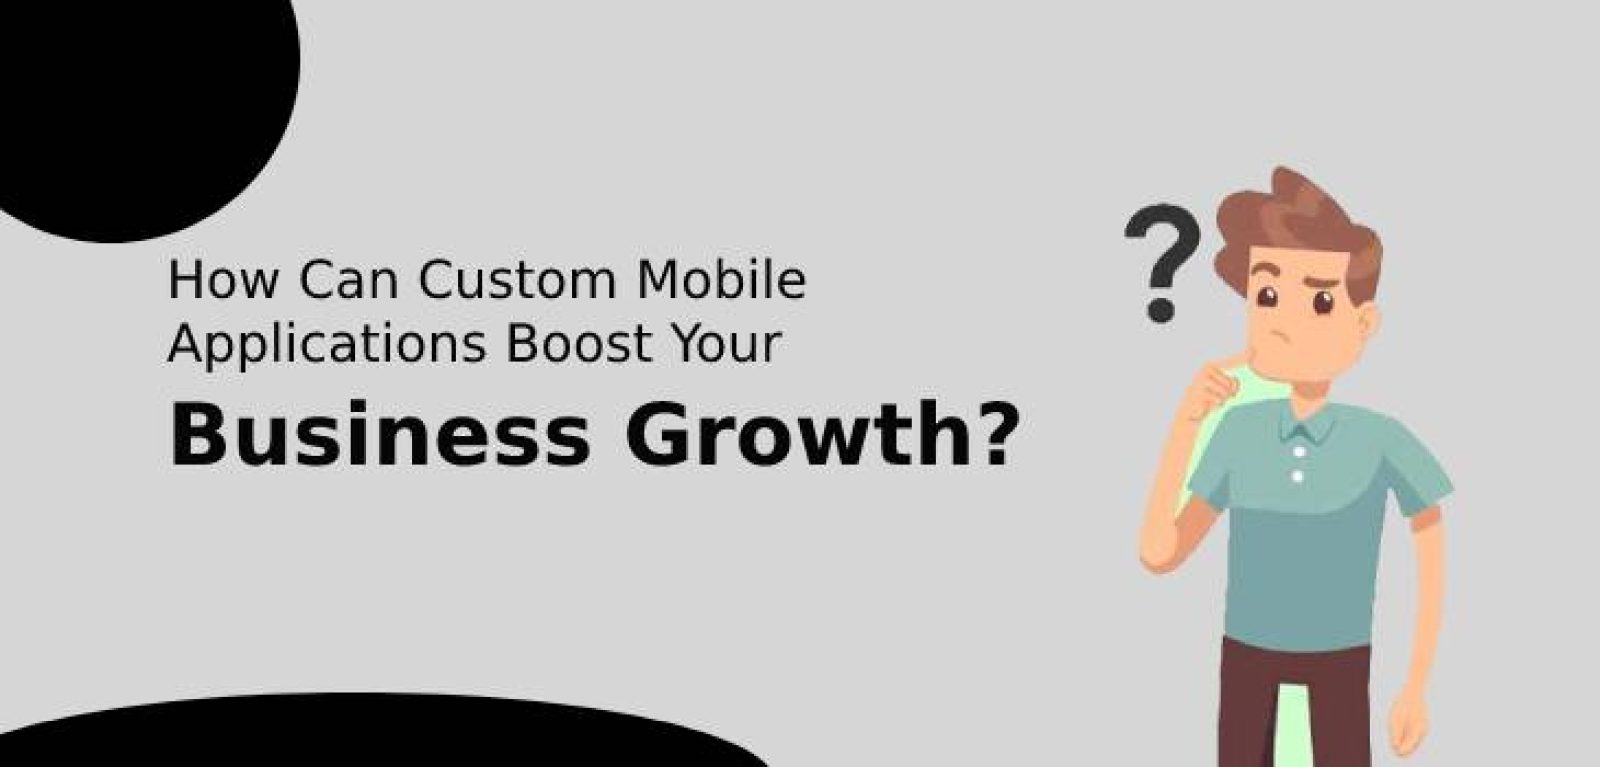 Mobile Applications Boost Your Business Growth